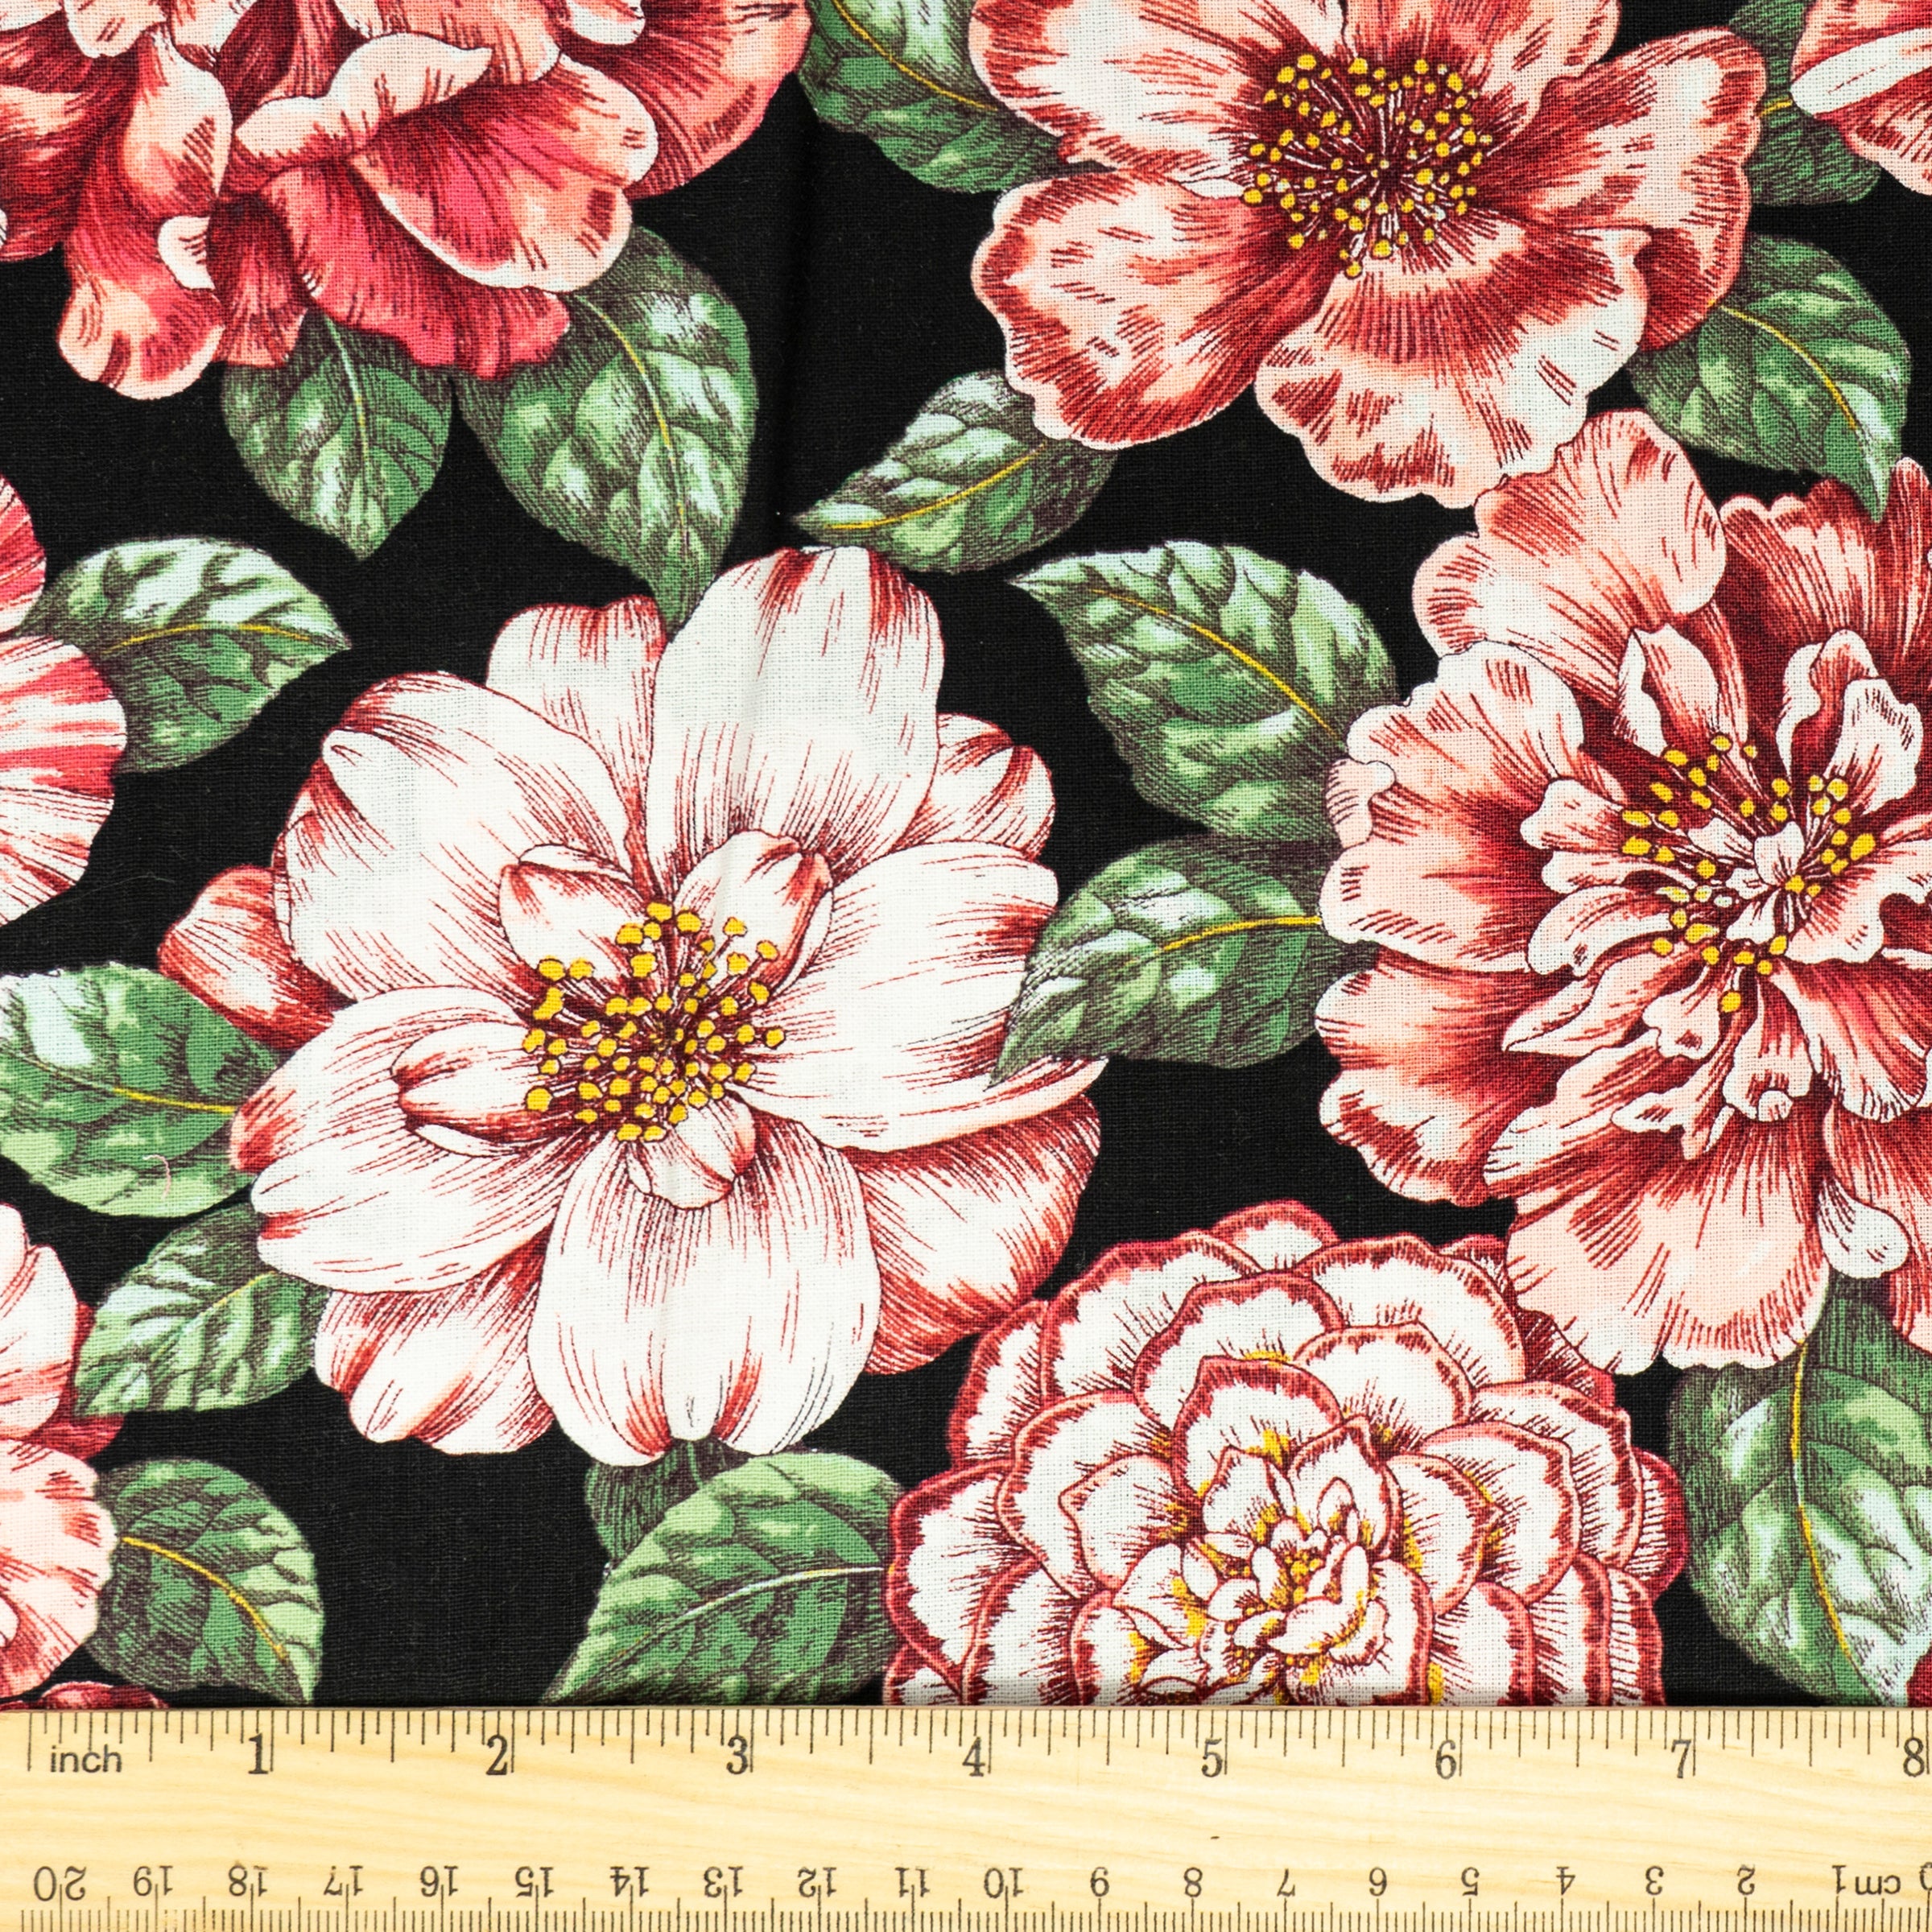 Waverly Inspirations 44" 100% Cotton Bridget Flower Sewing & Craft Fabric By the Yard, Black, Pink and Green